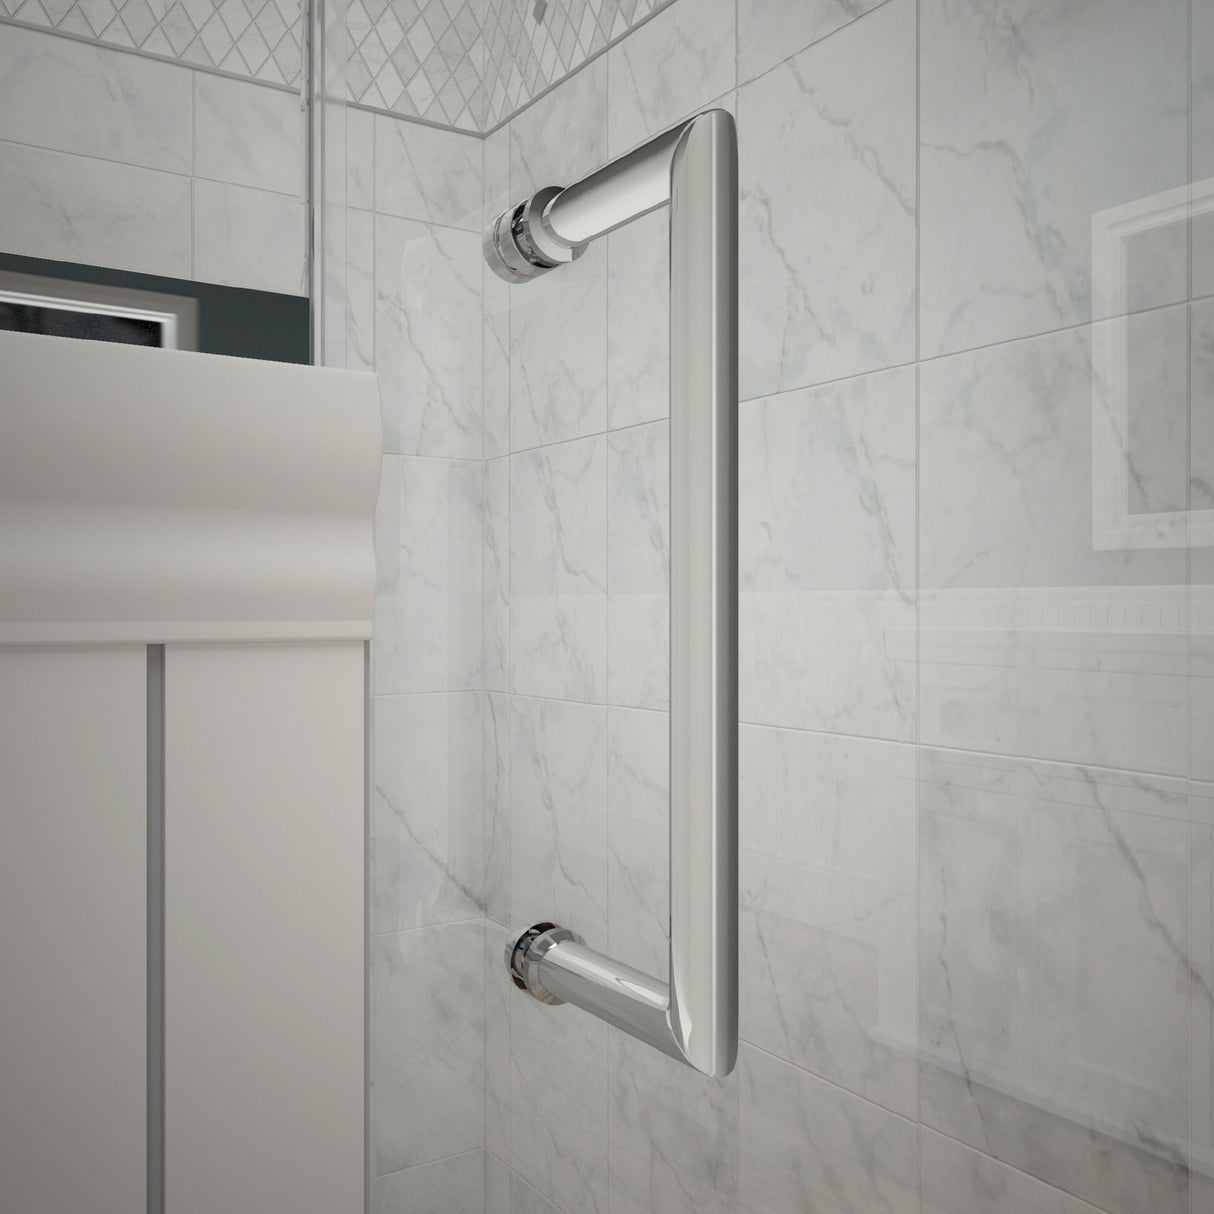 DreamLine Unidoor-X 36 3/8 in. W x 30 in. D x 72 in. H Frameless Hinged Shower Enclosure in Chrome